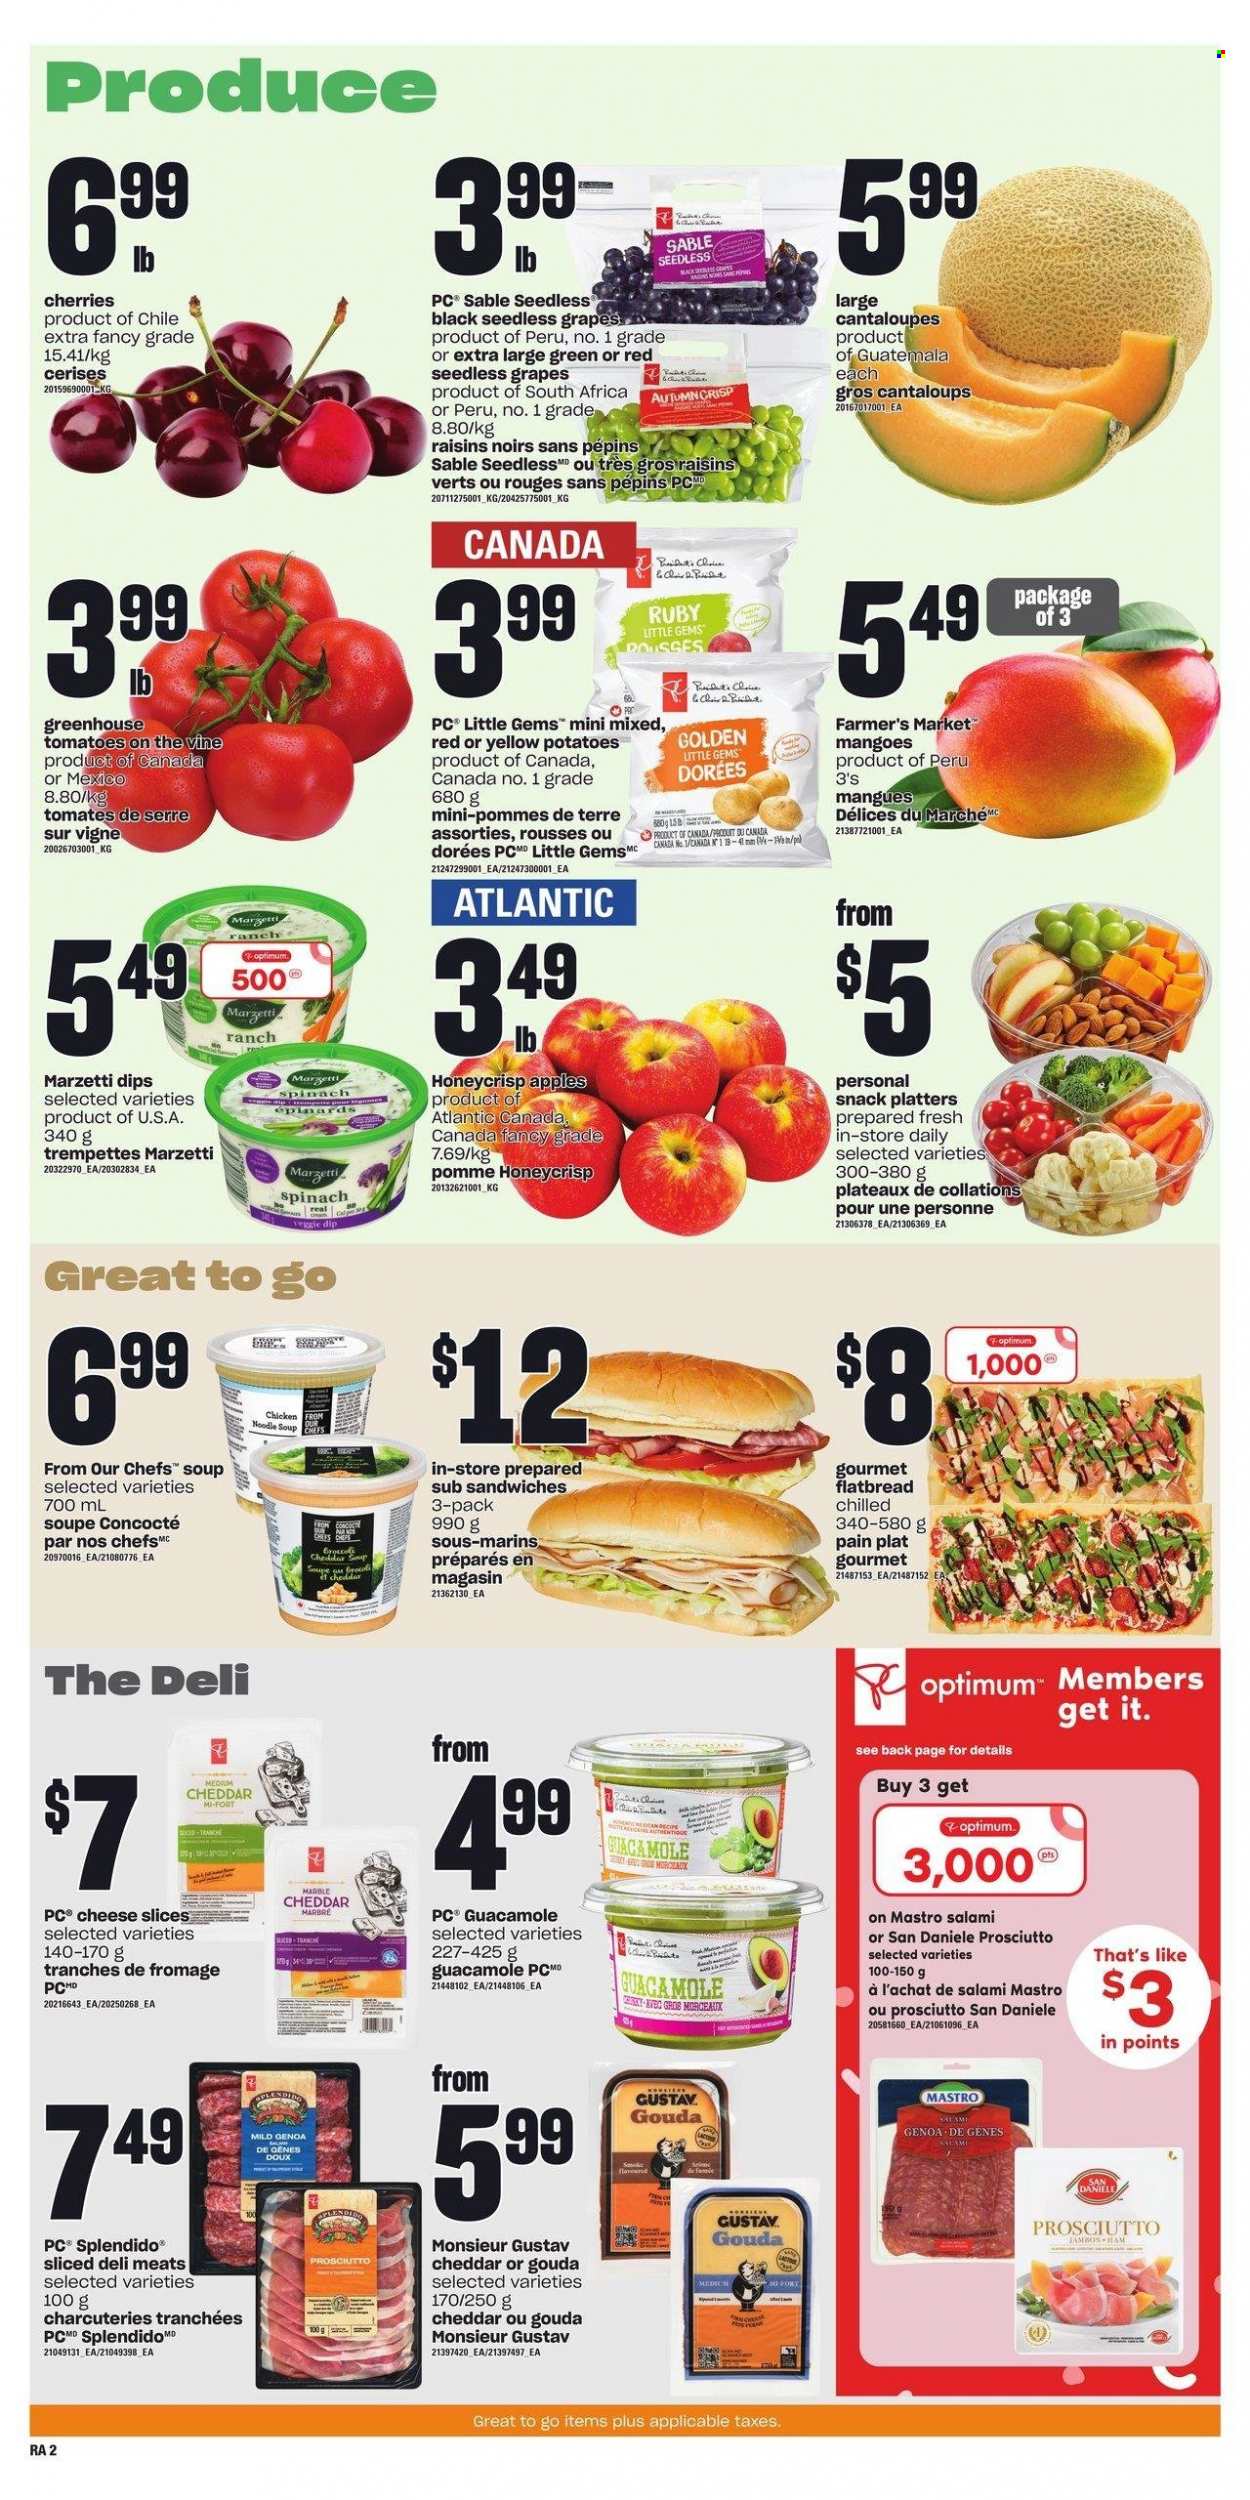 thumbnail - Atlantic Superstore Flyer - January 26, 2023 - February 01, 2023 - Sales products - flatbread, cantaloupe, tomatoes, potatoes, apples, grapes, mango, seedless grapes, cherries, sandwich, soup, noodles cup, noodles, salami, ham, prosciutto, guacamole, gouda, sliced cheese, cheddar, cheese, dried fruit, Optimum, raisins. Page 3.